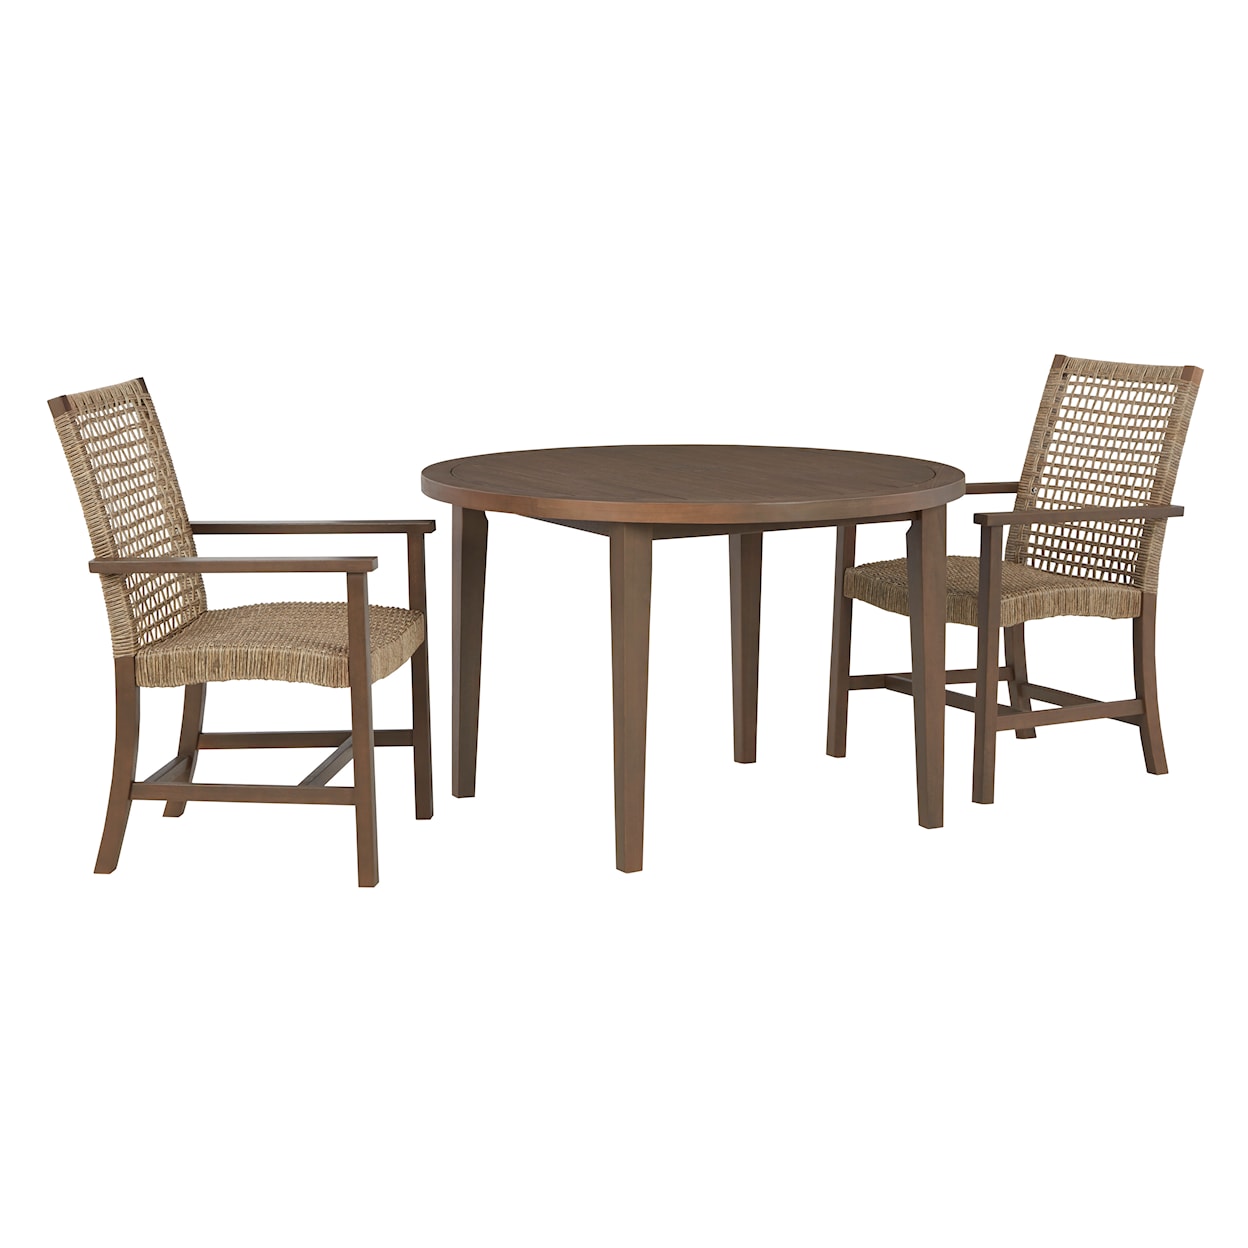 Michael Alan Select Germalia Outdoor Dining Table and 2 Chairs